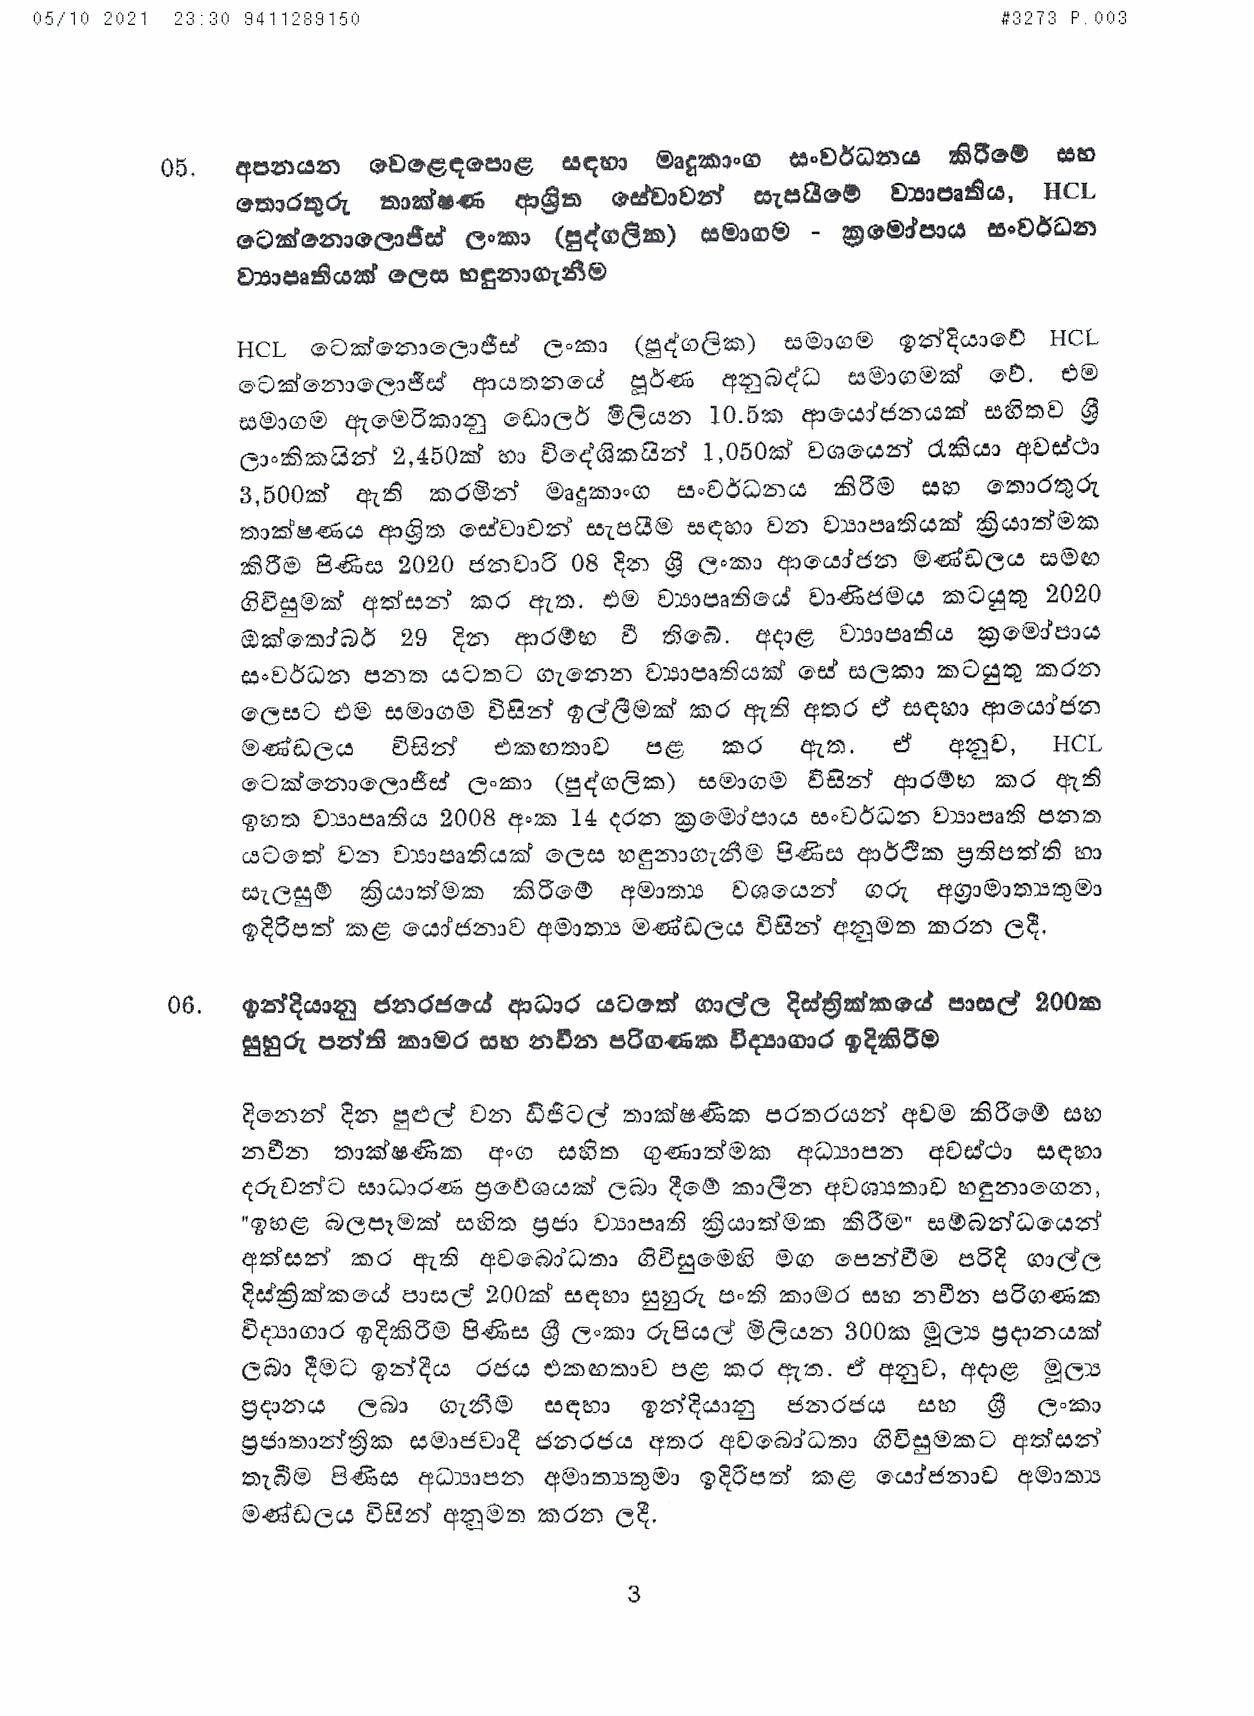 Cabinet Decision on 05.10.2021 page 003